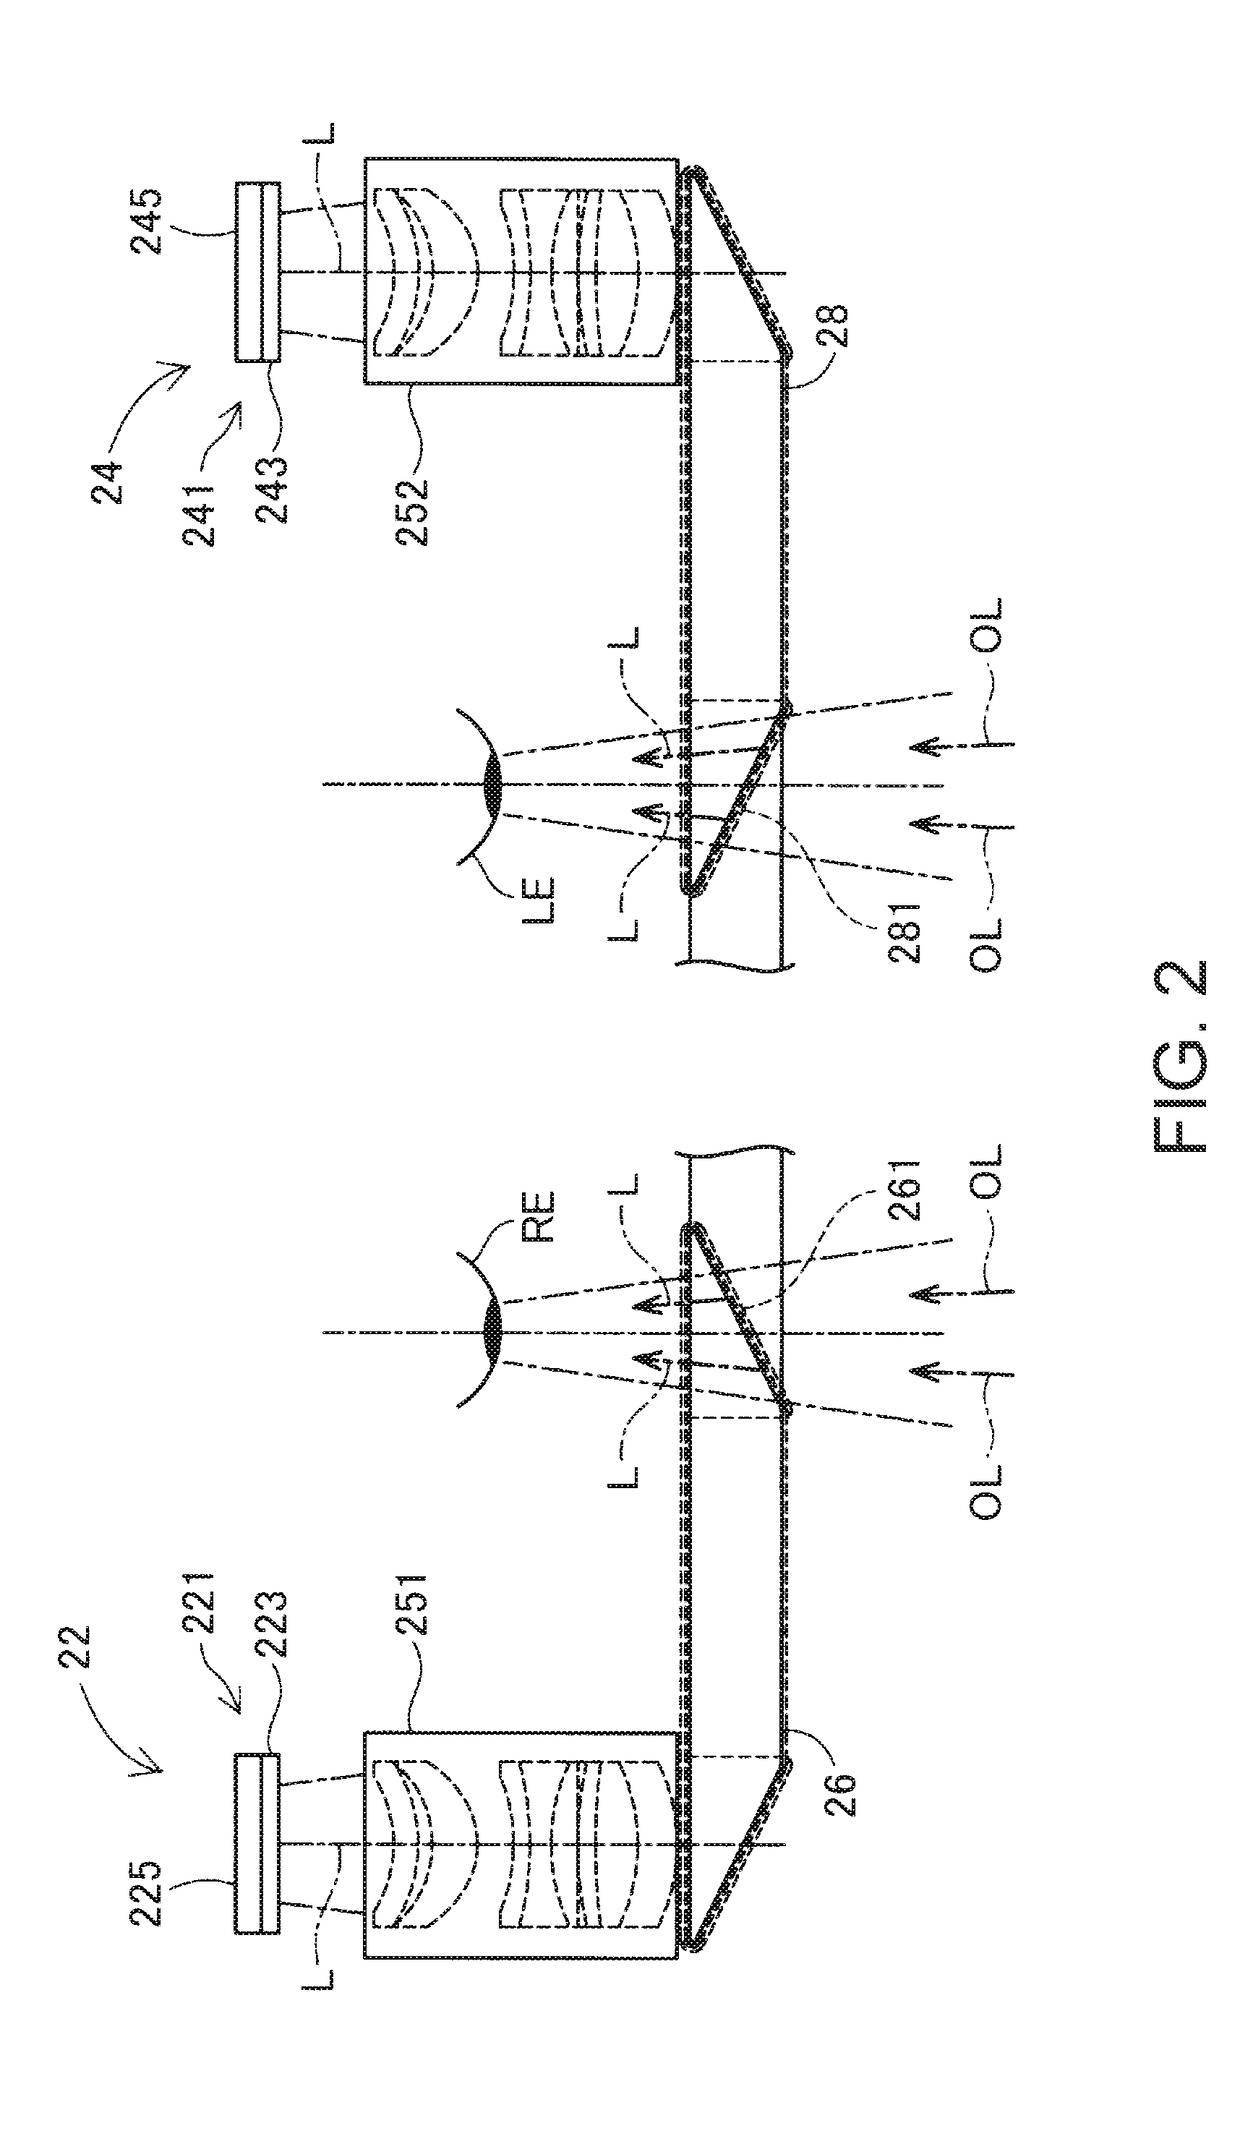 Head mounted display and method for maneuvering unmanned vehicle